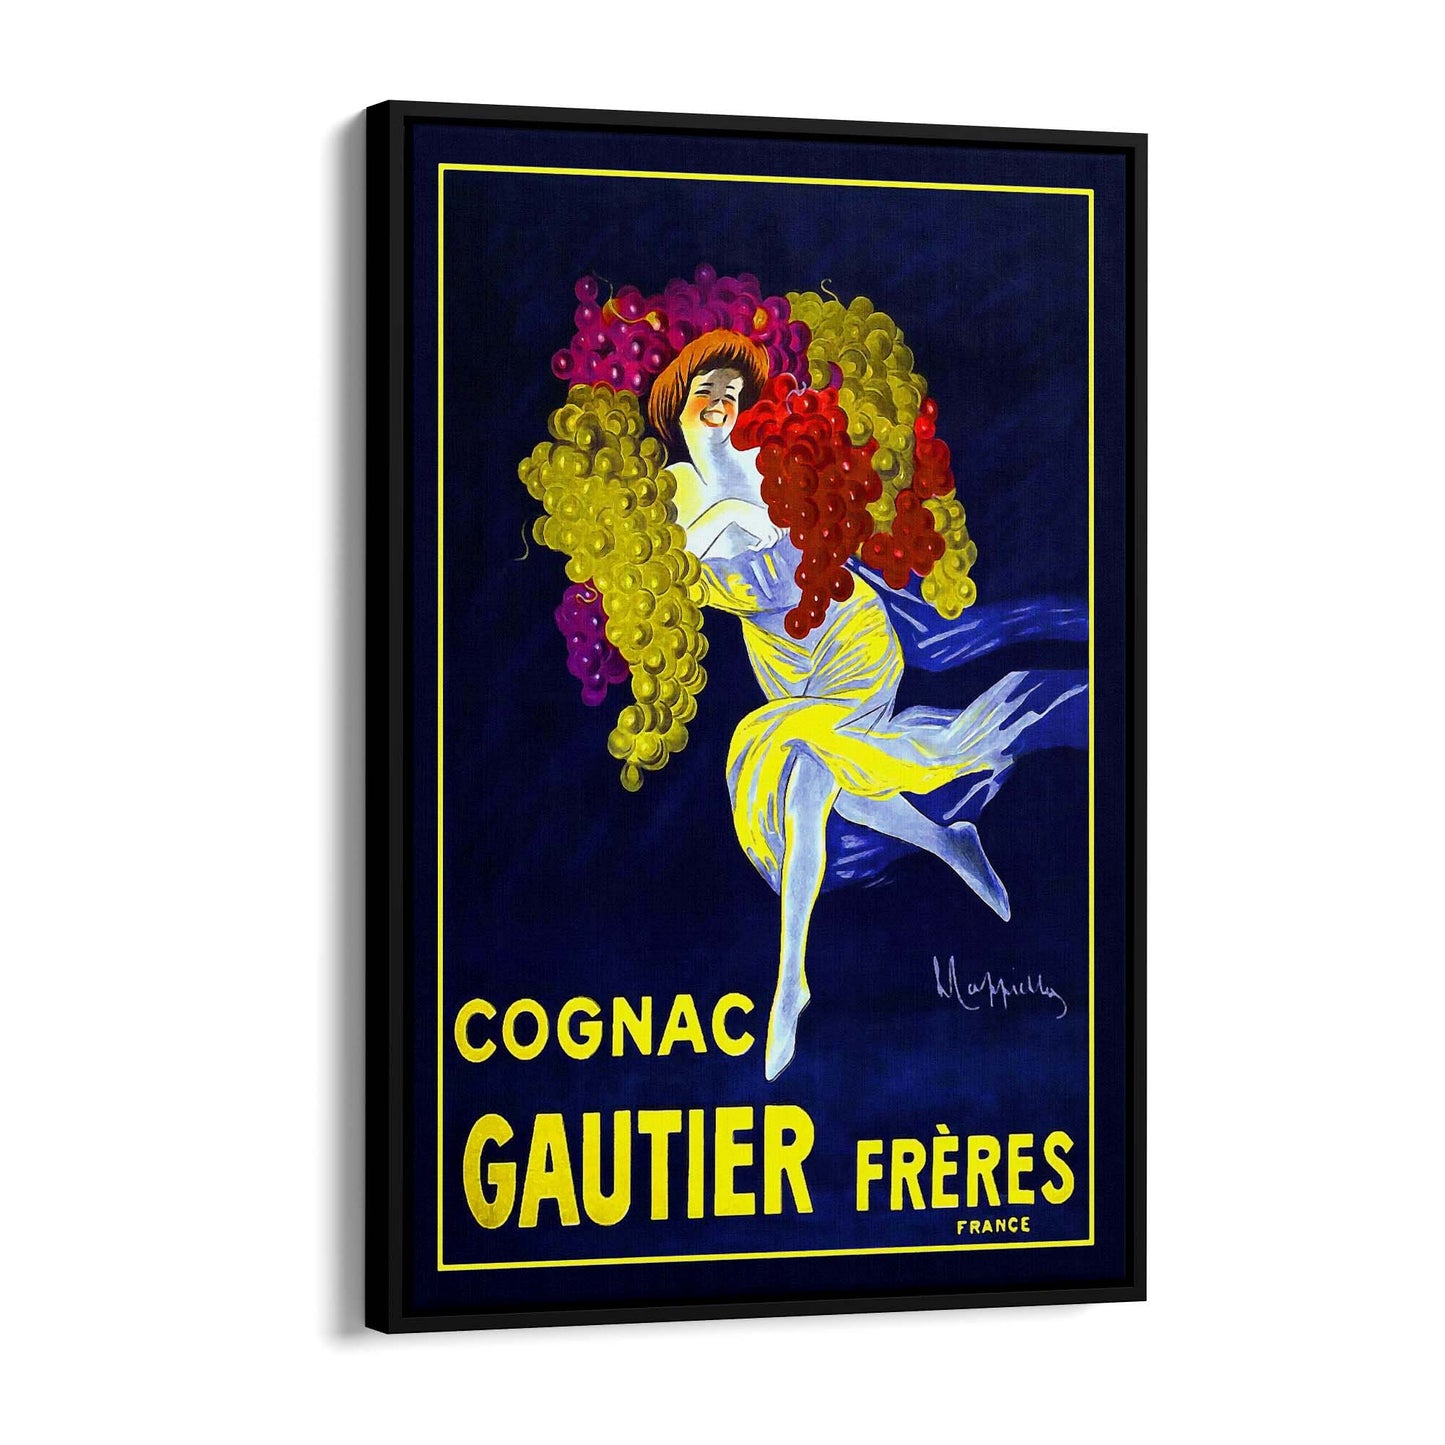 Gautier Frères Cognac Vintage Drinks Advert Wall Art - The Affordable Art Company